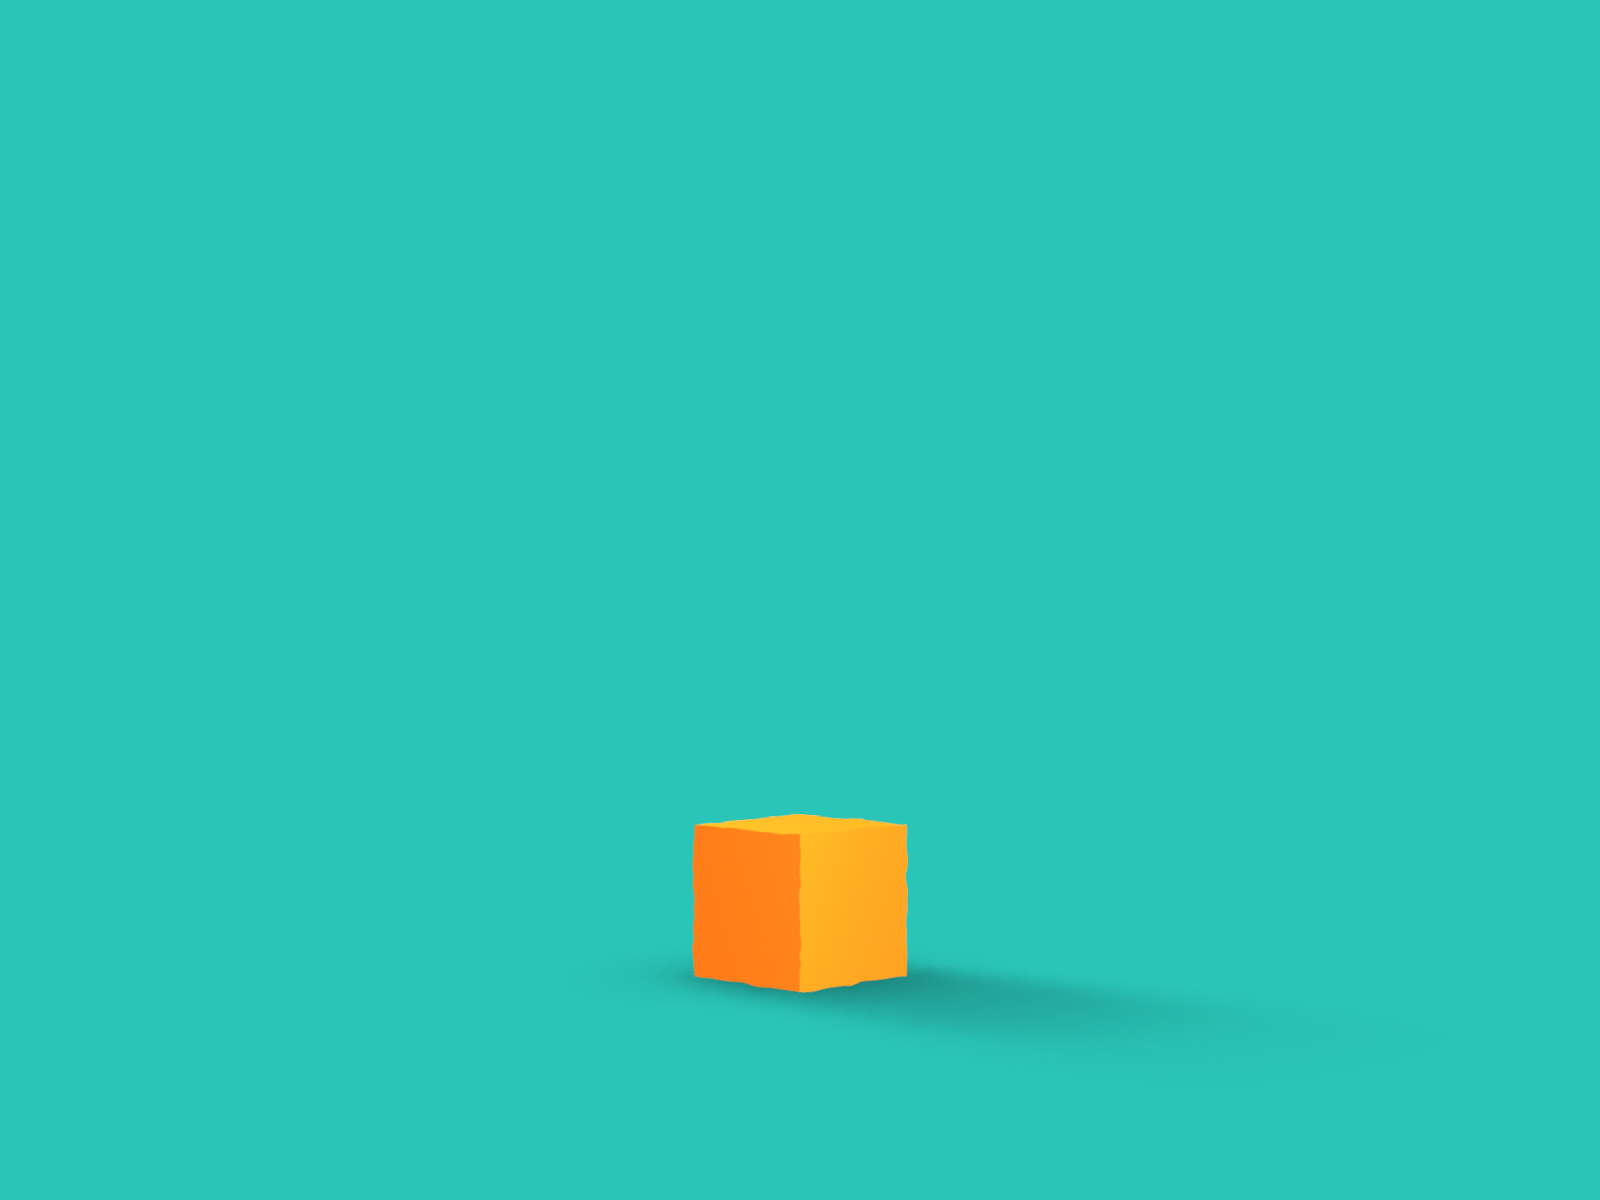 BOUNCY CUBY (PROJECT FILE IN DESCRIPTION) 2d 3d after effects aftereffects animation loop motion motion graphics